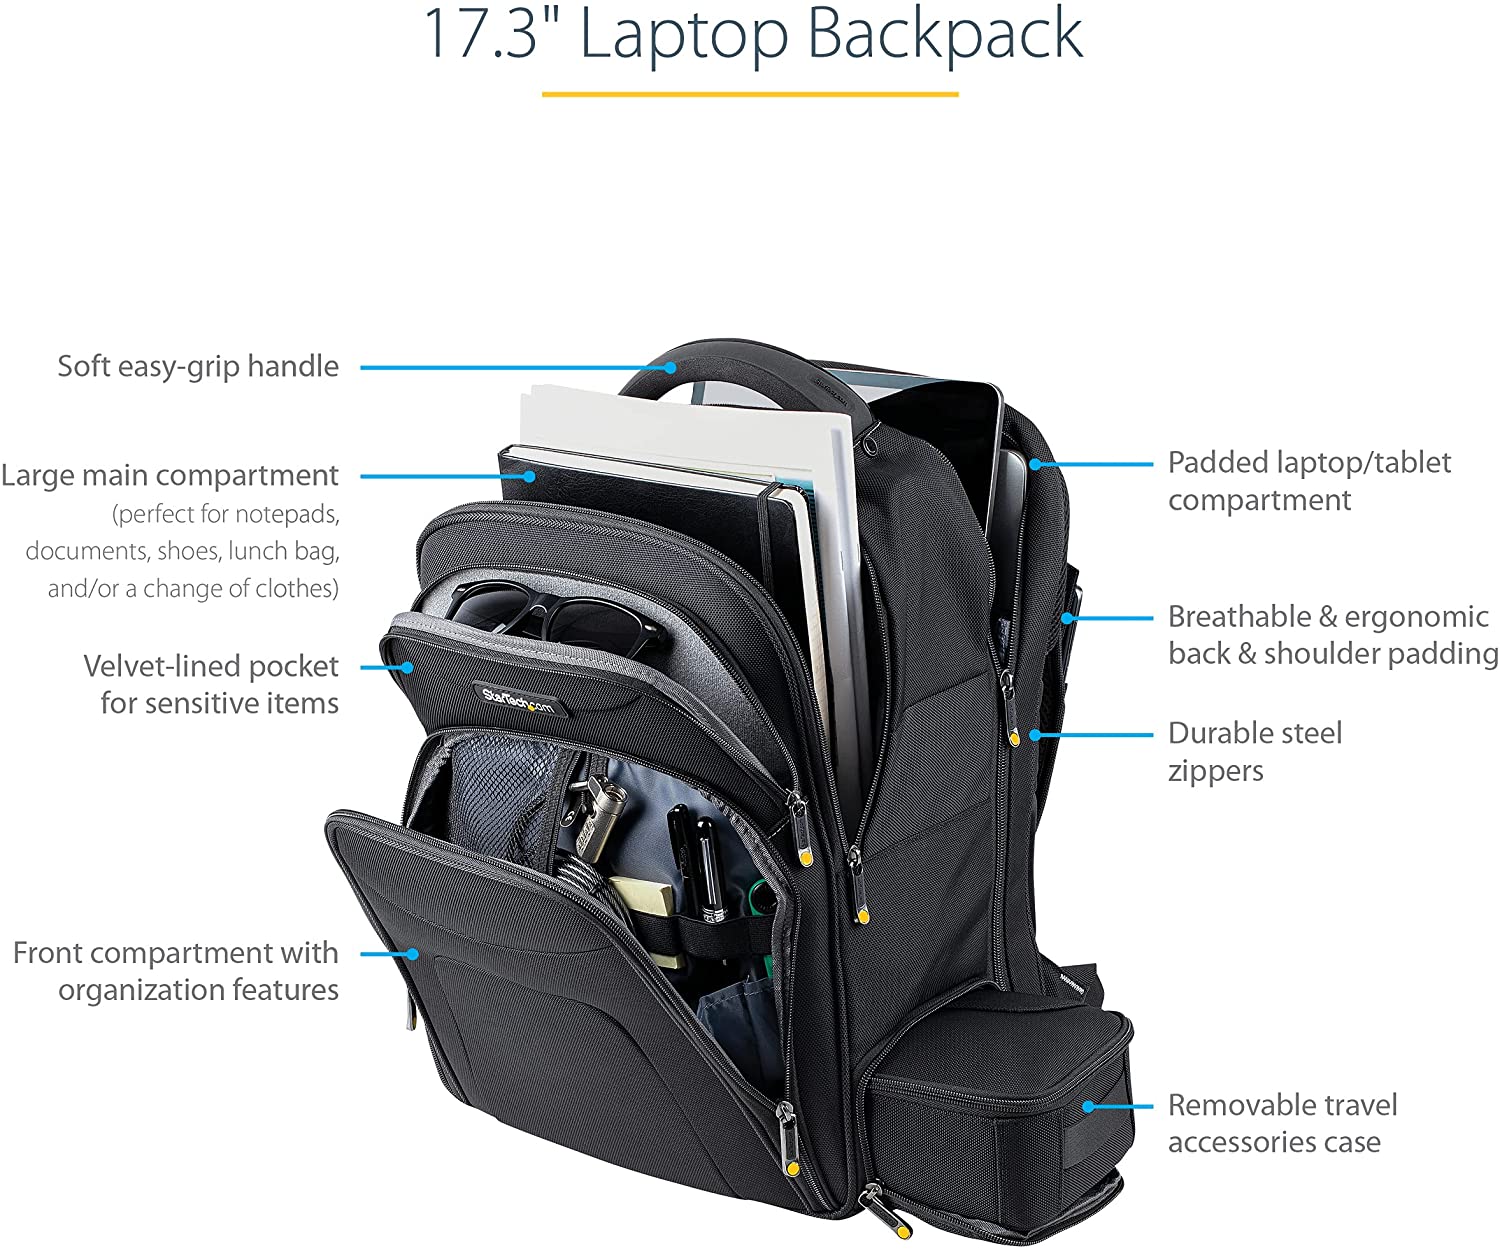 Professional Travel Work Daily Use Backpack Shoulder Carrying Case for 15.6  inch Laptops, Acer Nitro 5, Asus TUF Gaming - Walmart.com